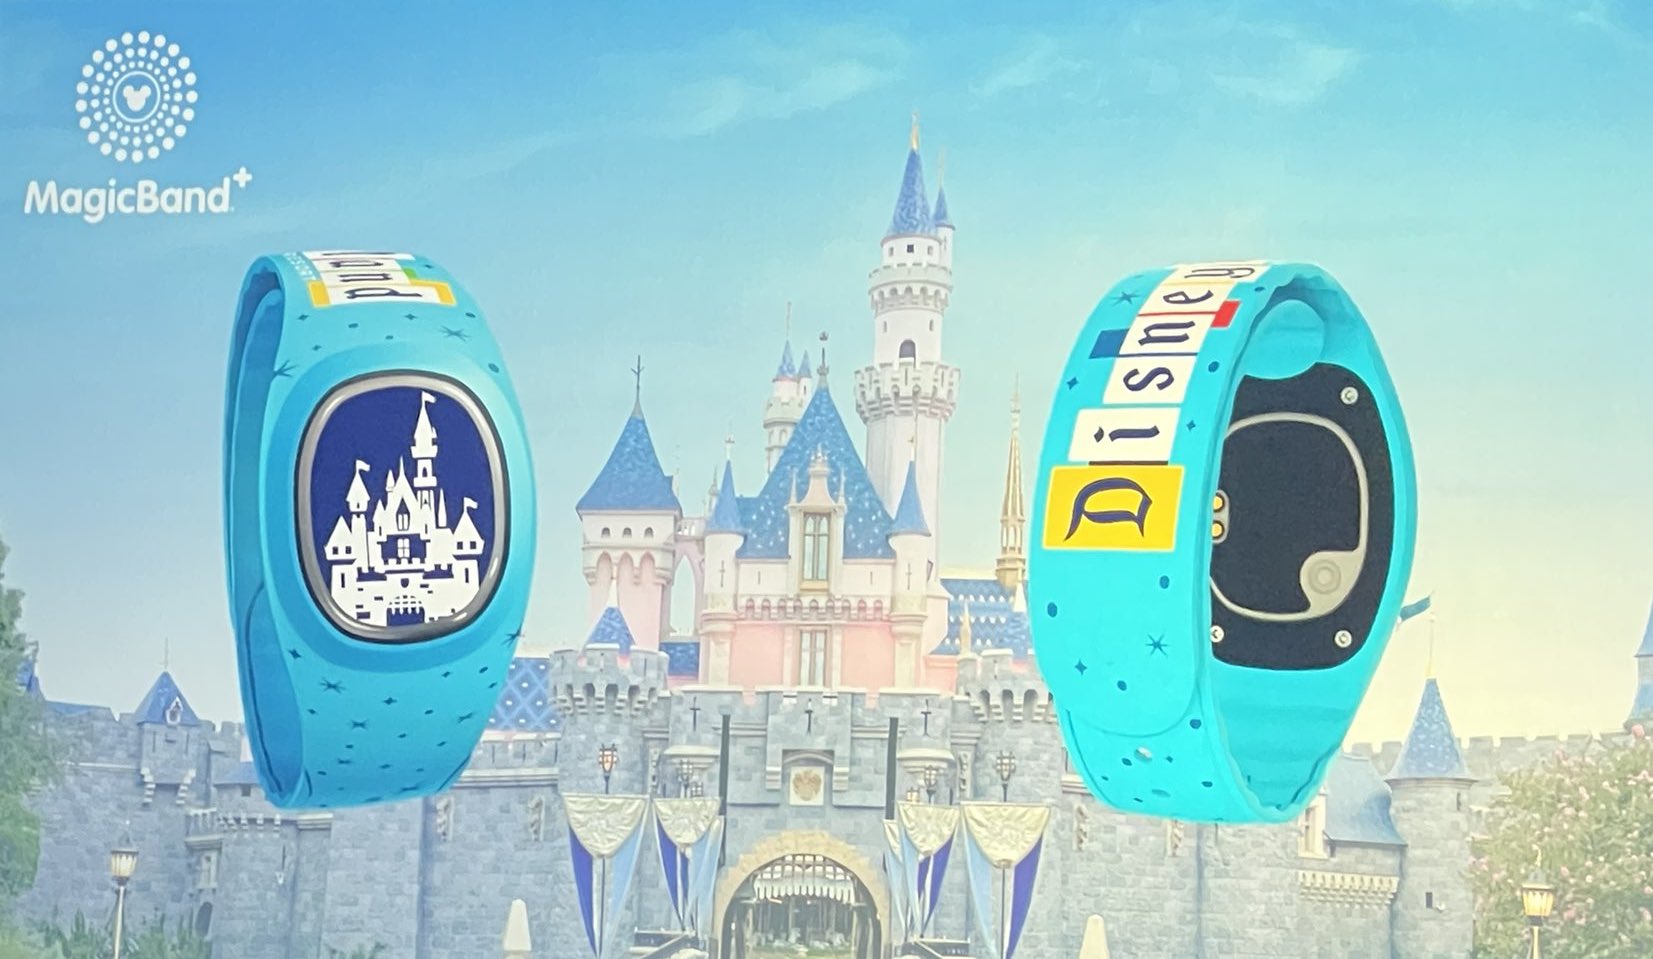 MagicBand+, with Disneyland exclusive designs, coming to Disneyland in early 2022